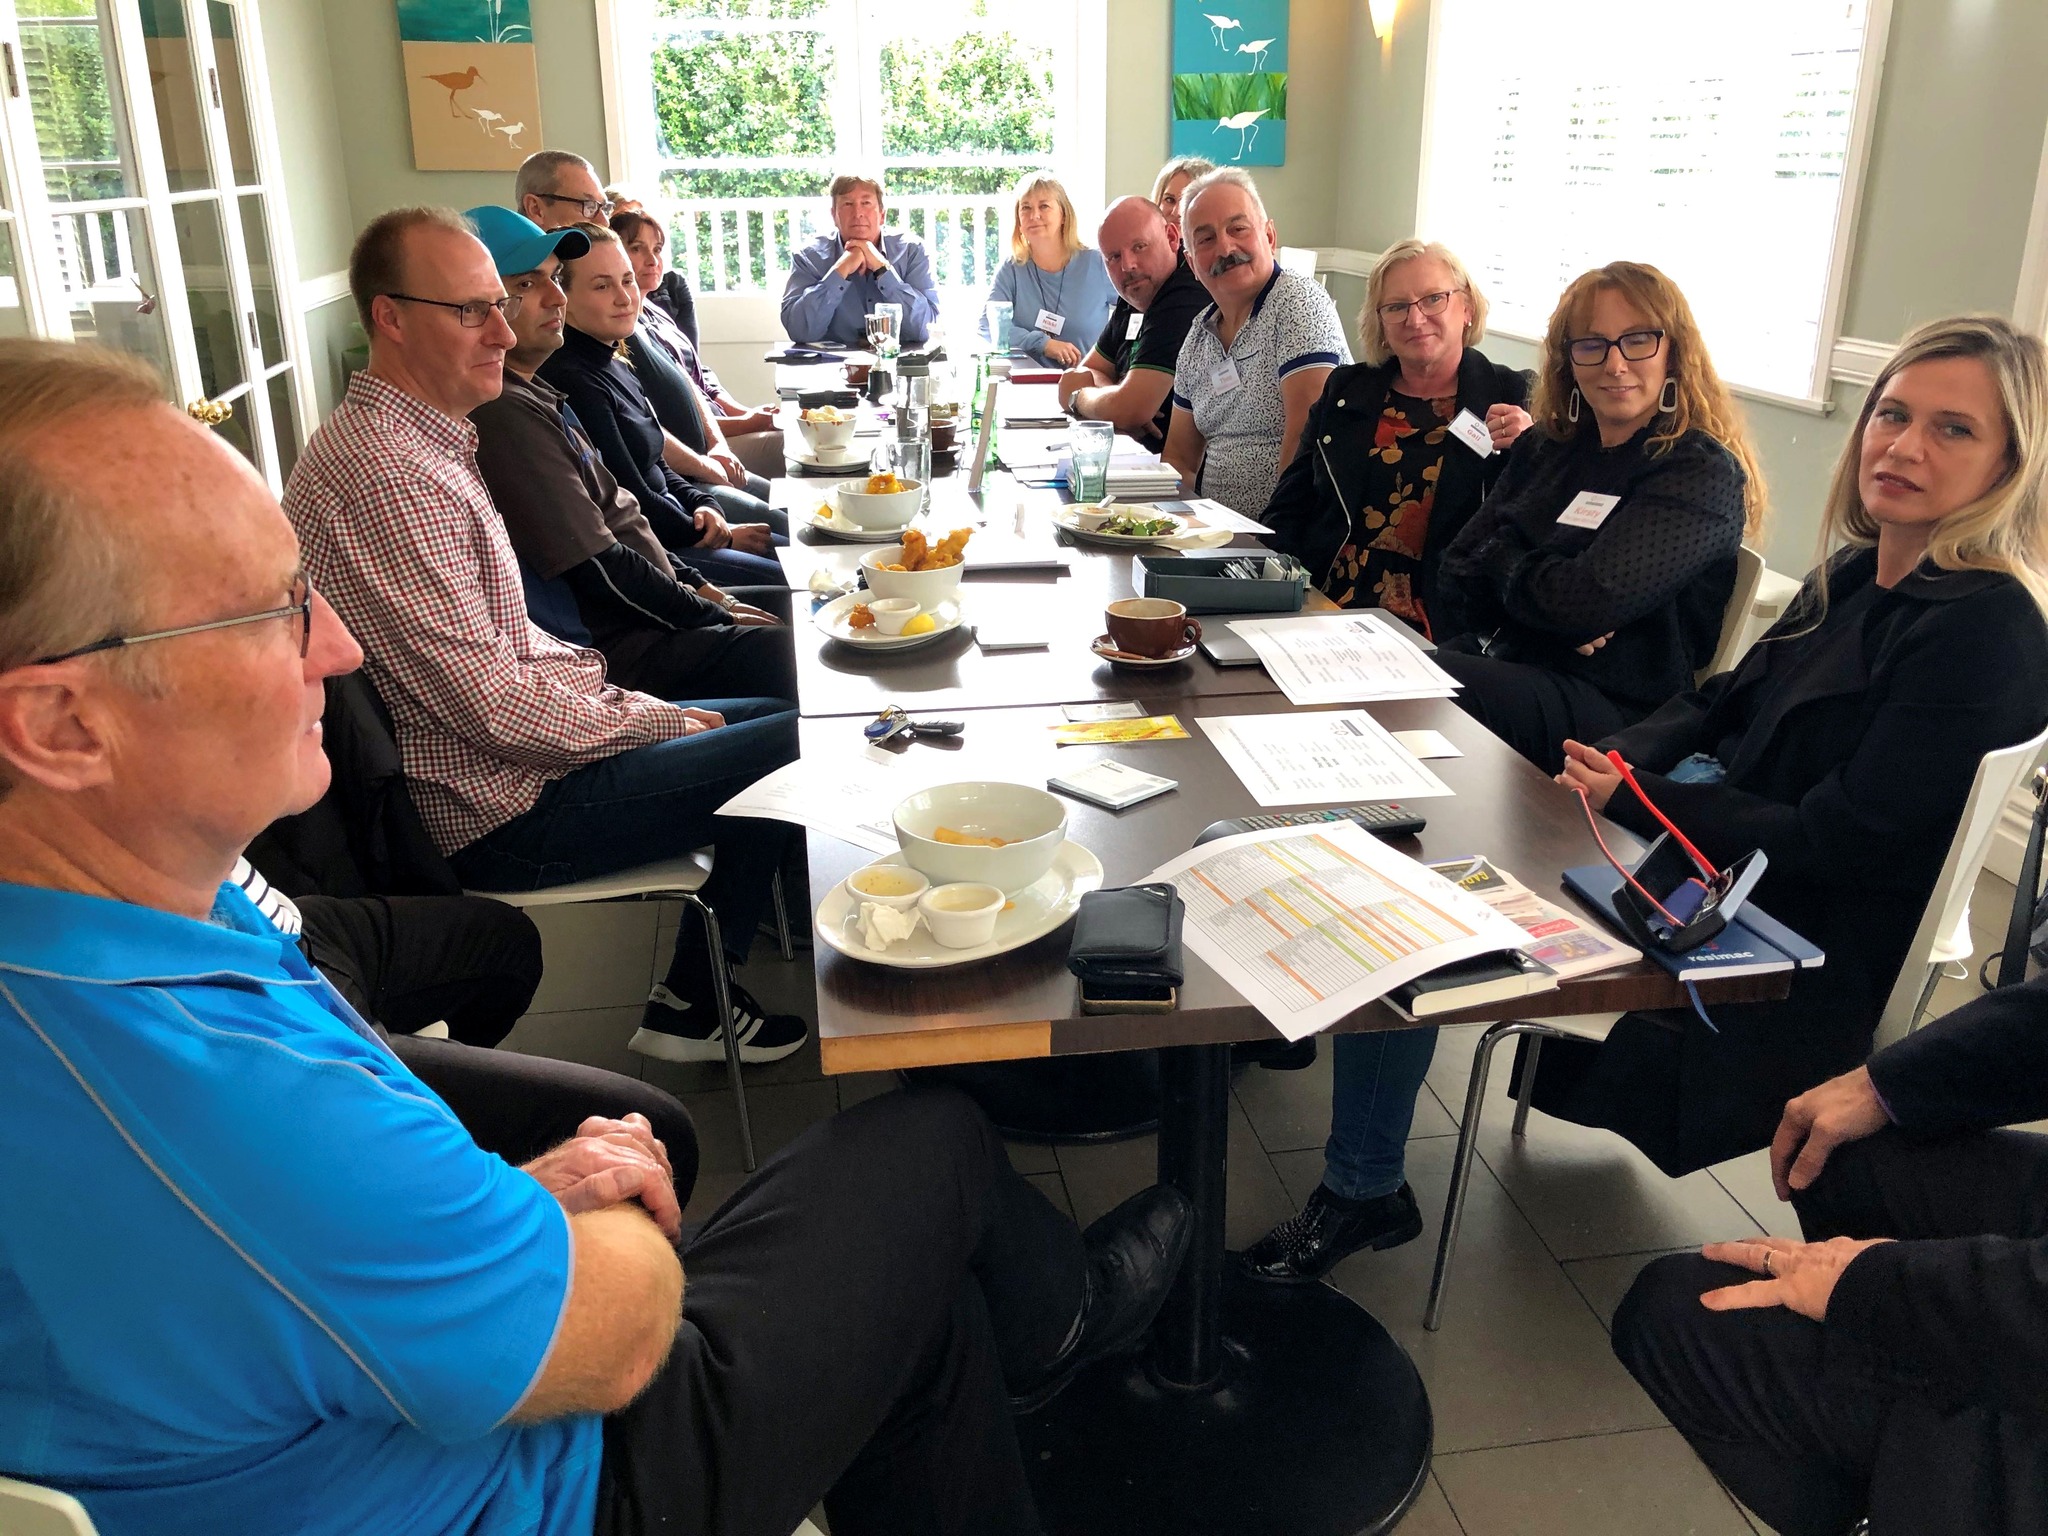 Upcoming Meetings for TNG Business Networking Groups – week ending 20th of May 2022